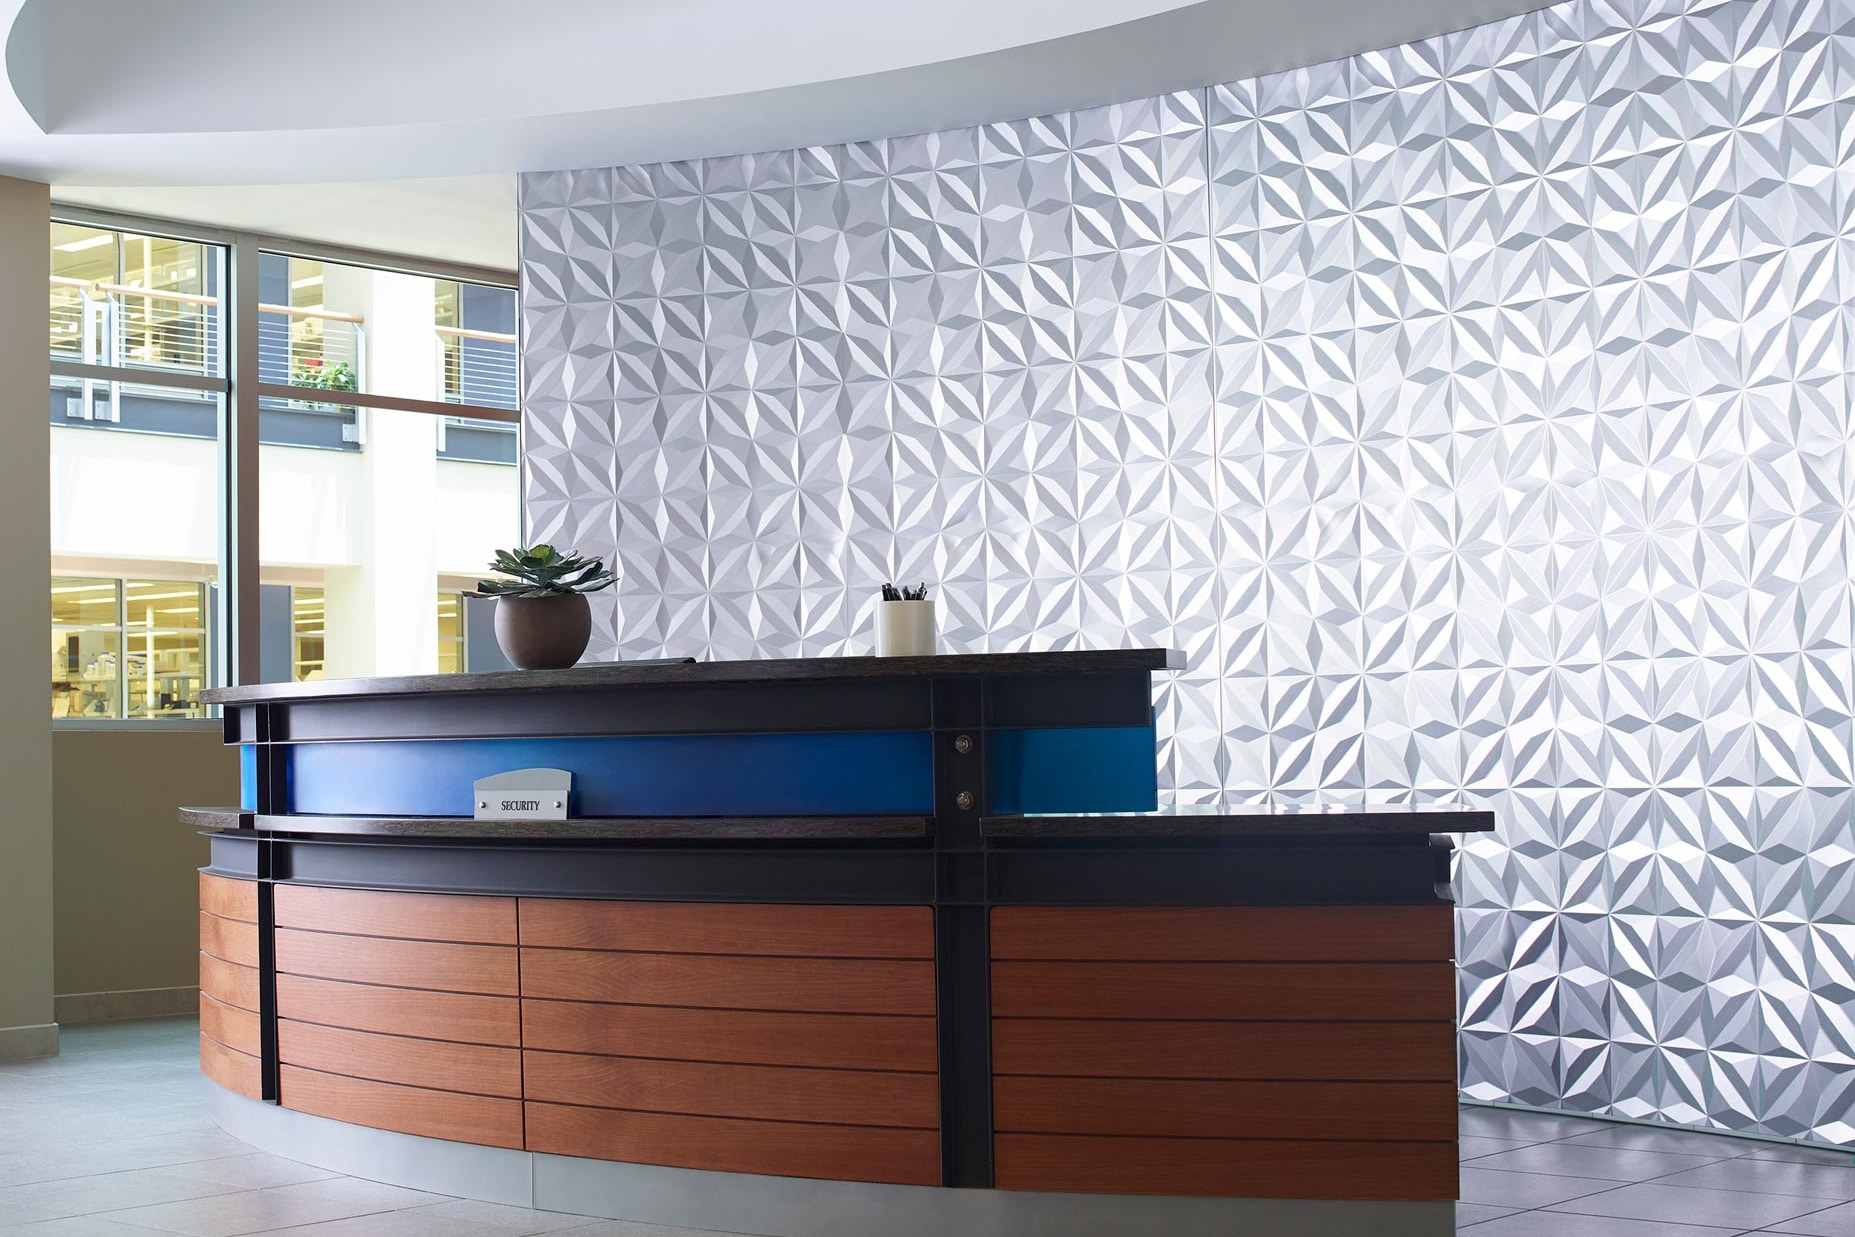 How Wallcoverings Can Make a Statement in Any Space